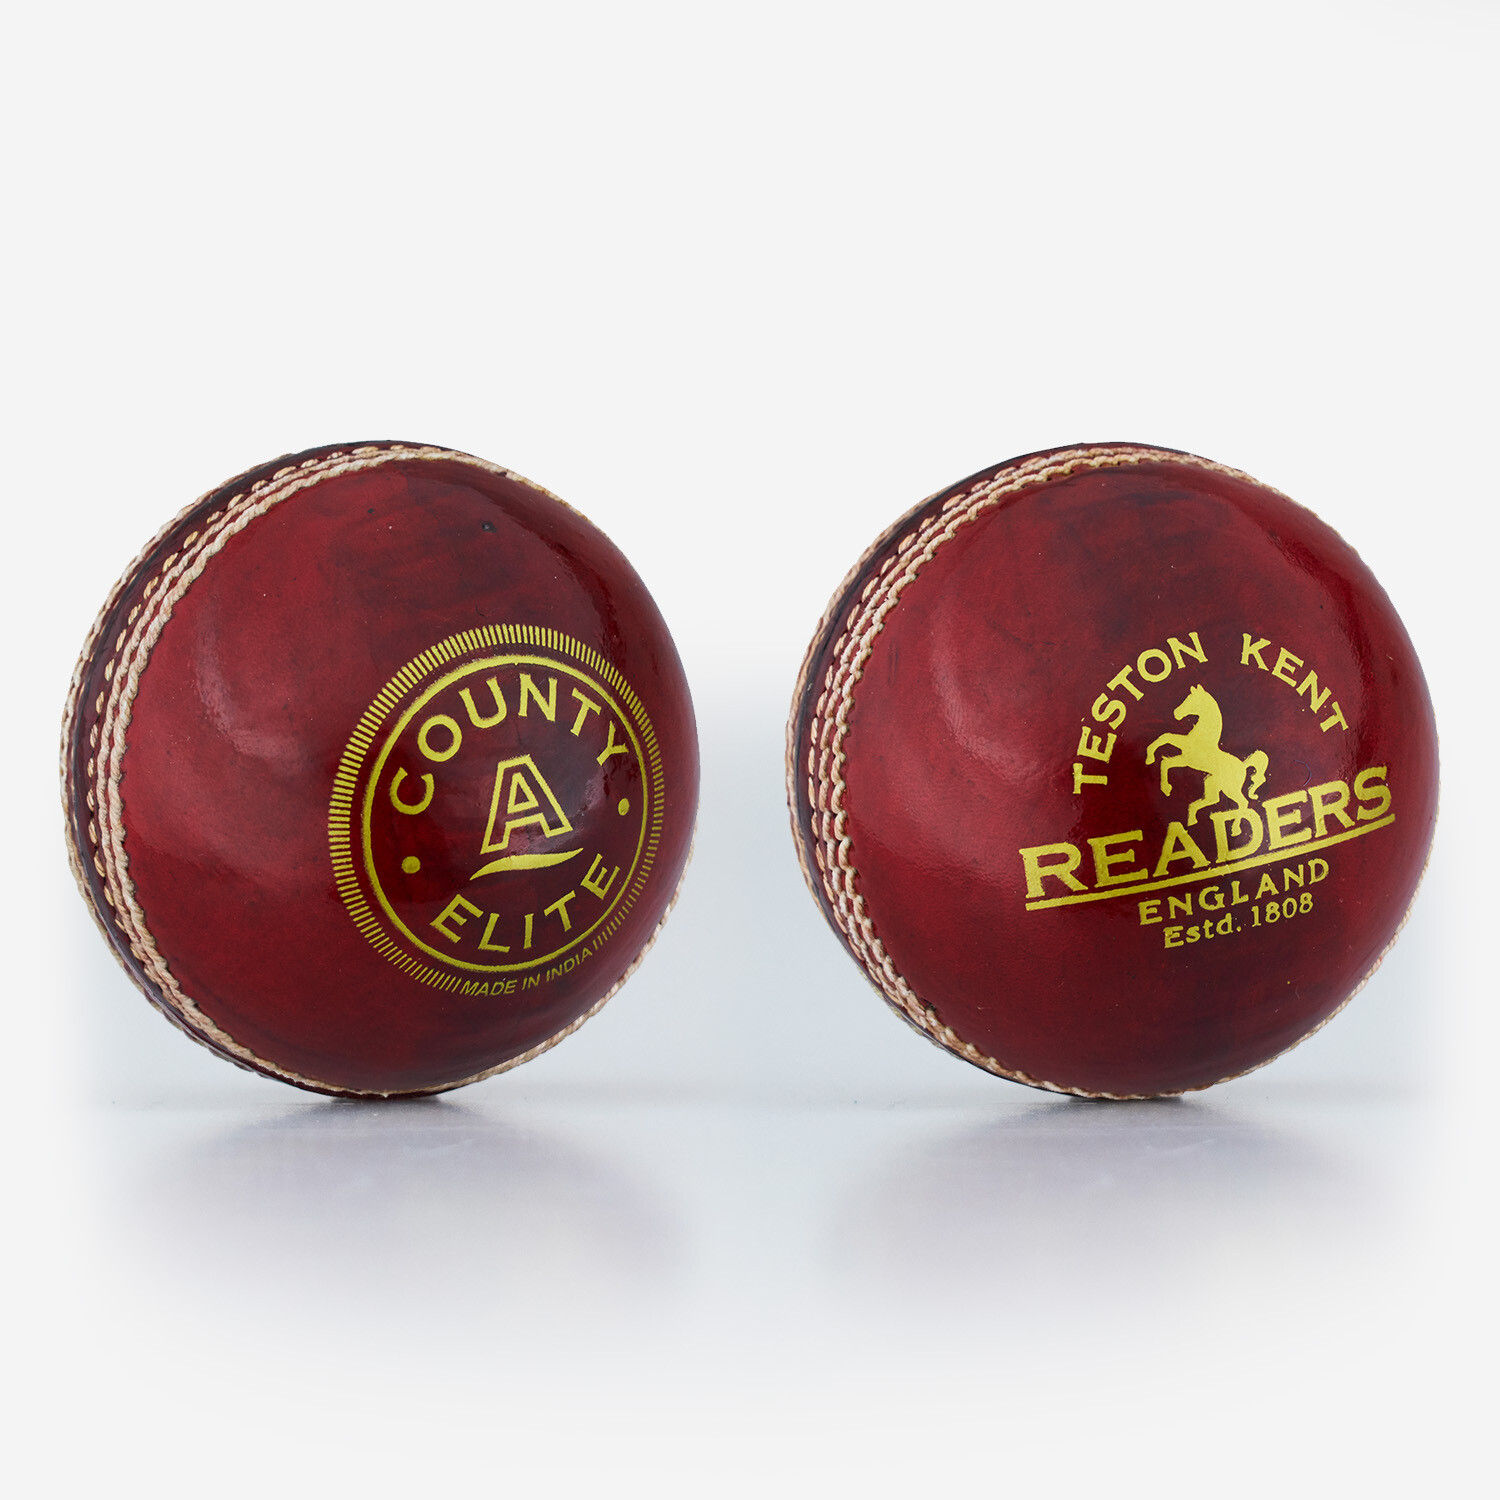 Readers County Elite Red Leather Cricket Ball